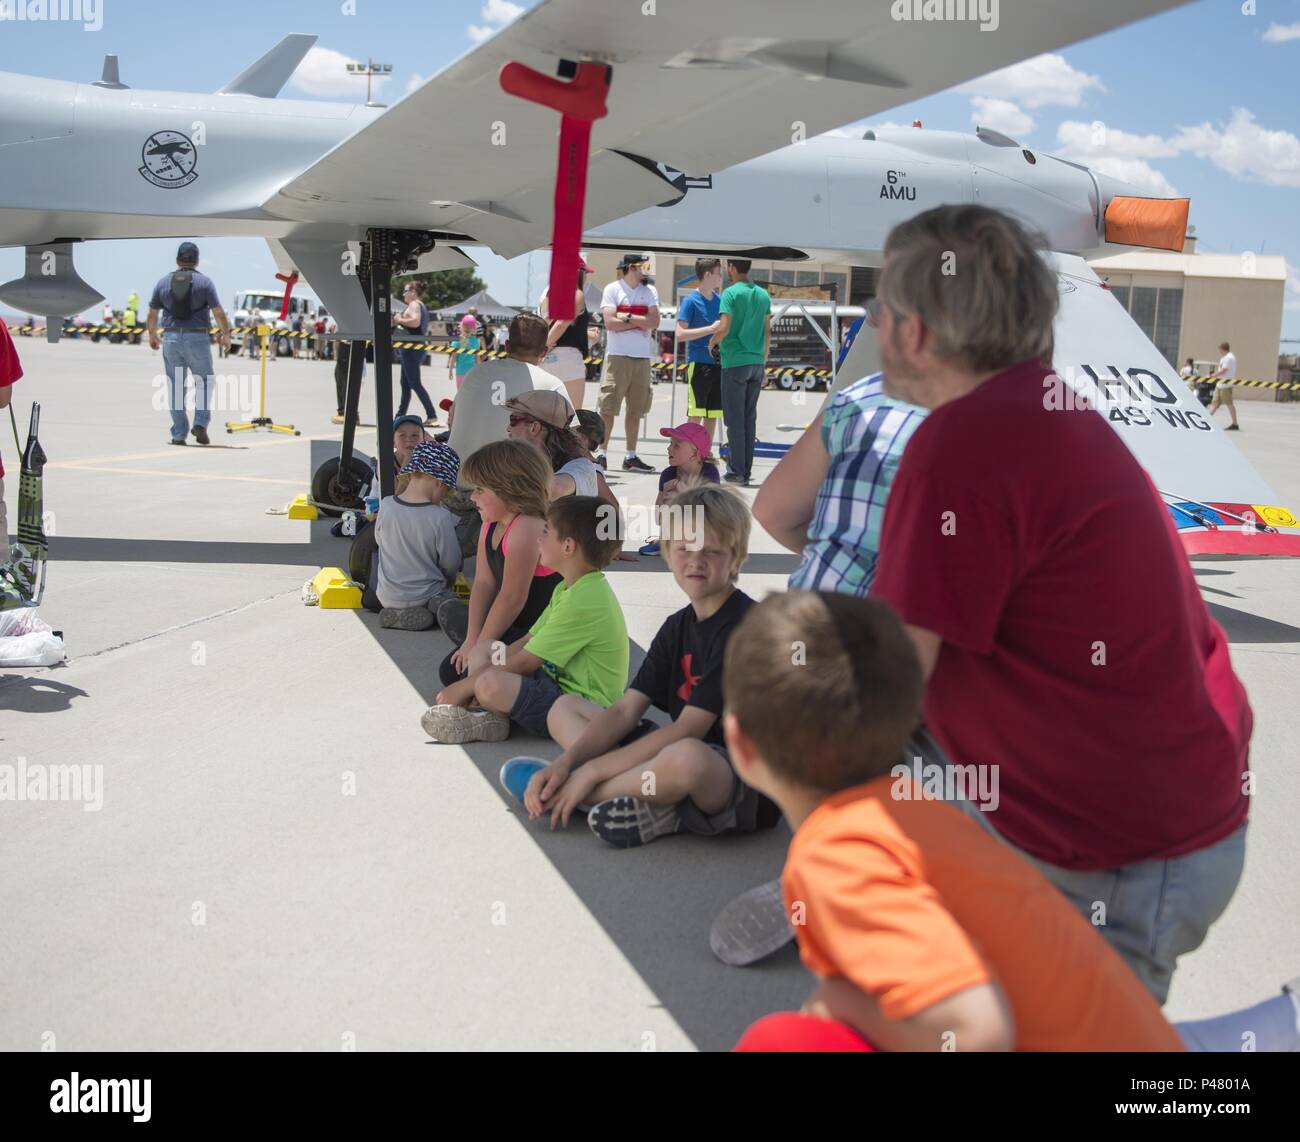 Visitors at the Kirtland Air Force Base Air Show rest in the shade of an MQ-1 Predator on June 5. Over 50,000 people visited the Kirtland AFB Open House June 4 and 5. Holloman Airmen had the opportunity to display an MQ-1 Predator and answer questions visitors had about RPAs and their mission at Holloman. (U.S. Air Force photo by Airman 1st Class Randahl J. Jenson) Stock Photo